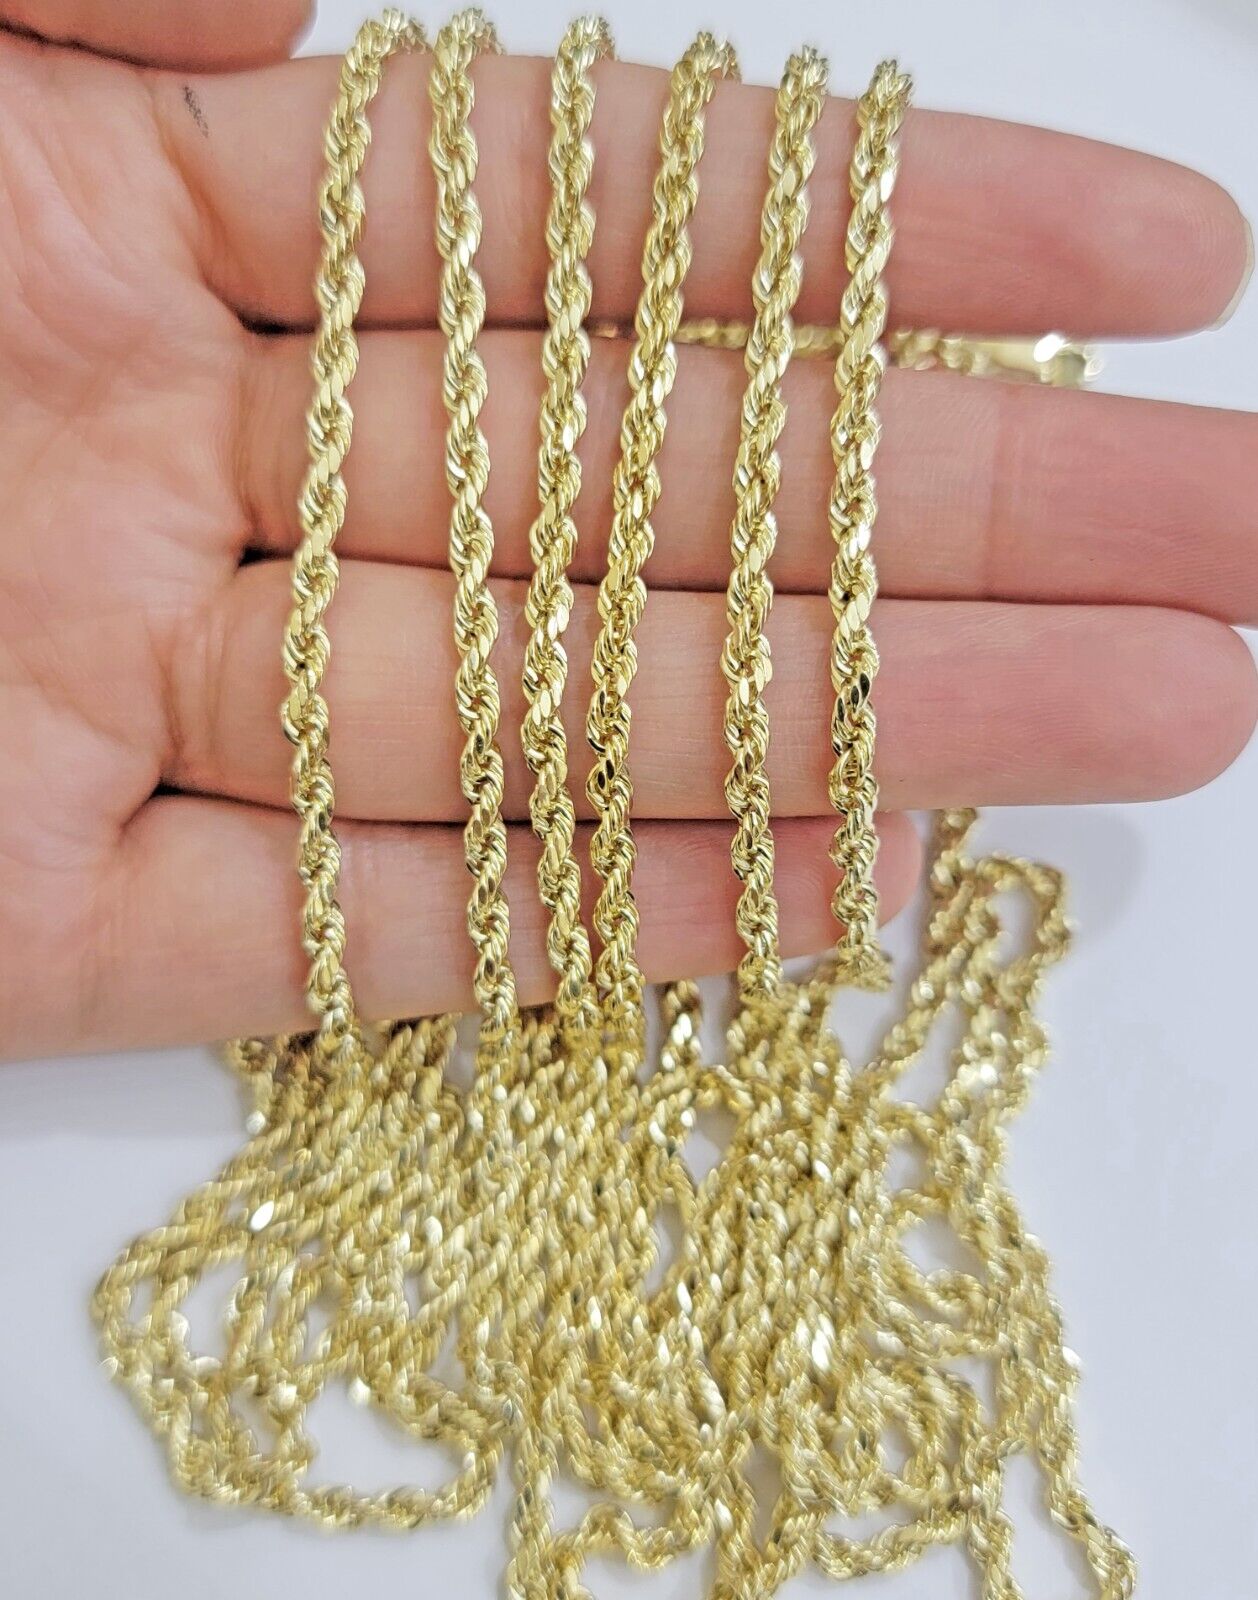 Real 14k Yellow Gold Rope Chain Necklace 28 Inch 3mm Diamond Cut Men Women SOLID